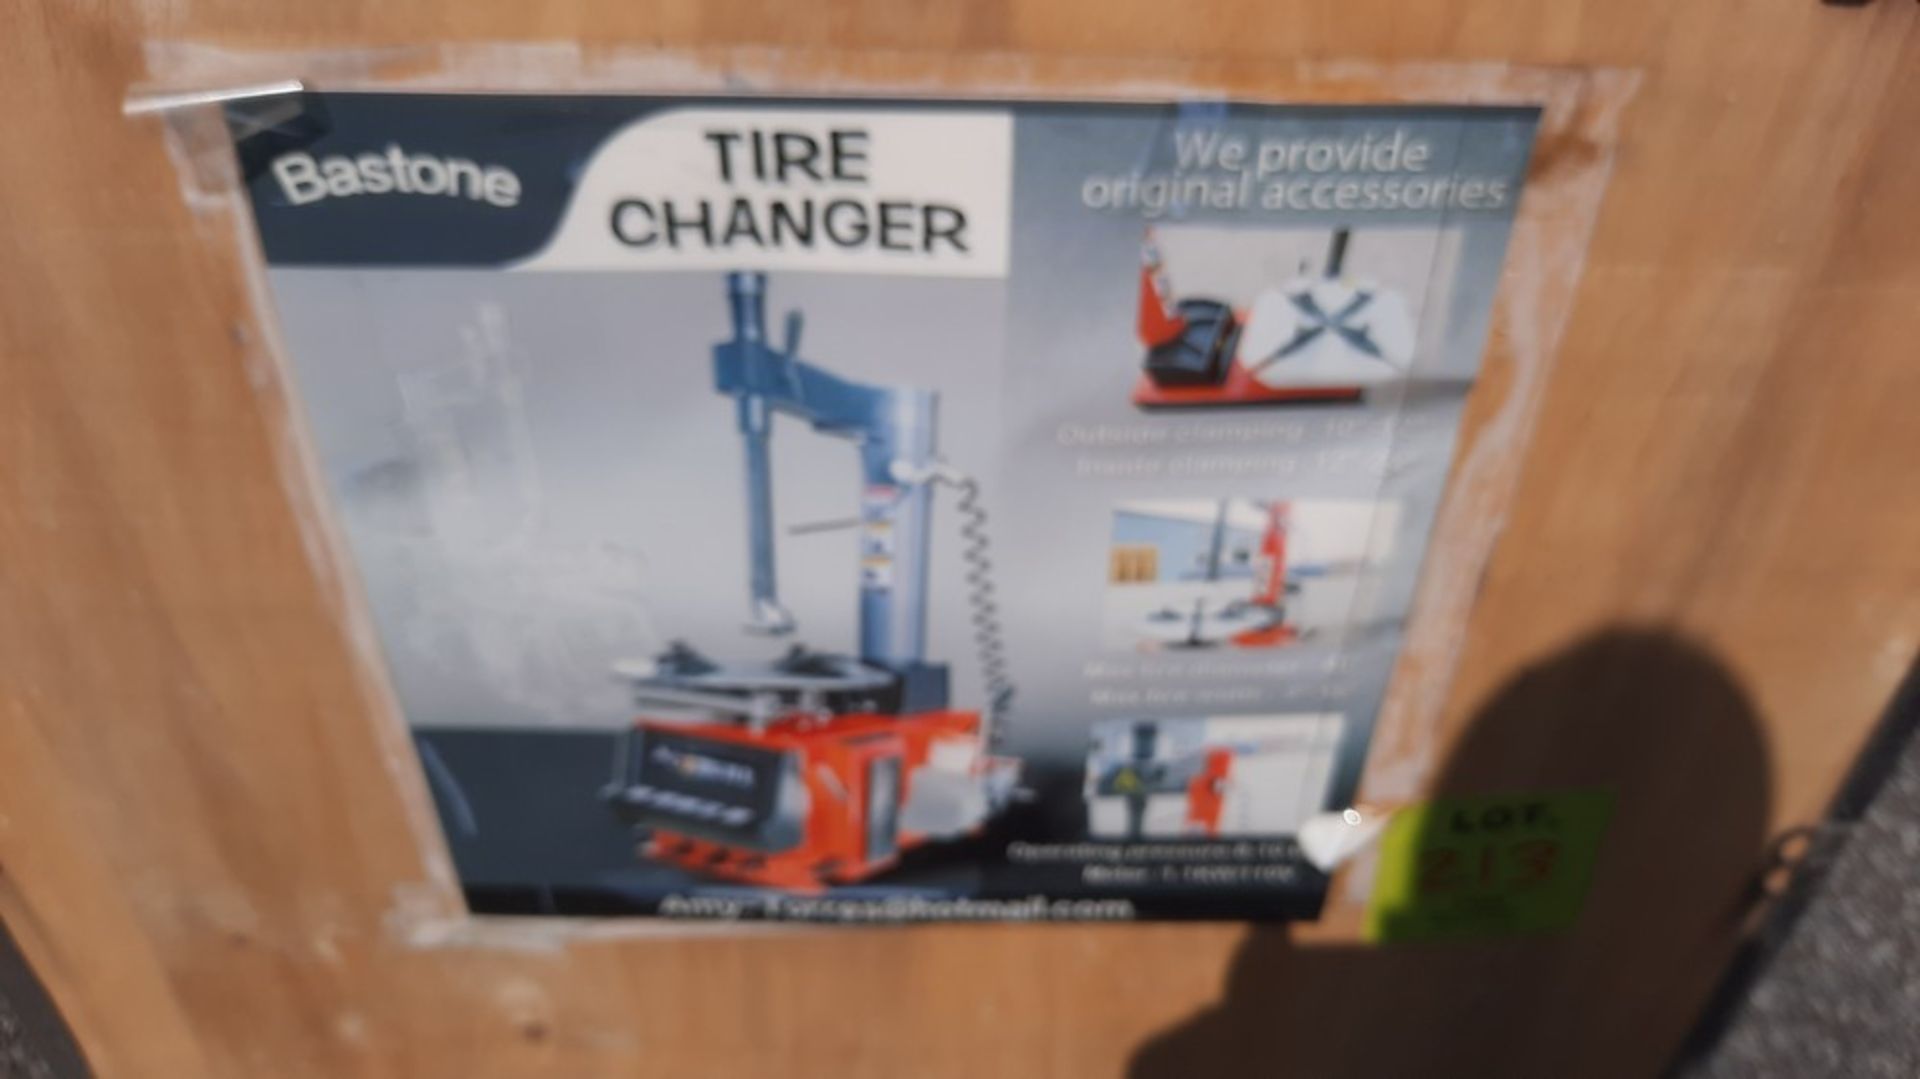 Bastone Tire changer: 110V, 60hz Heavy Duty Automotive Tire Changer - Outside Clamping 10”-22” - Ins - Image 2 of 4